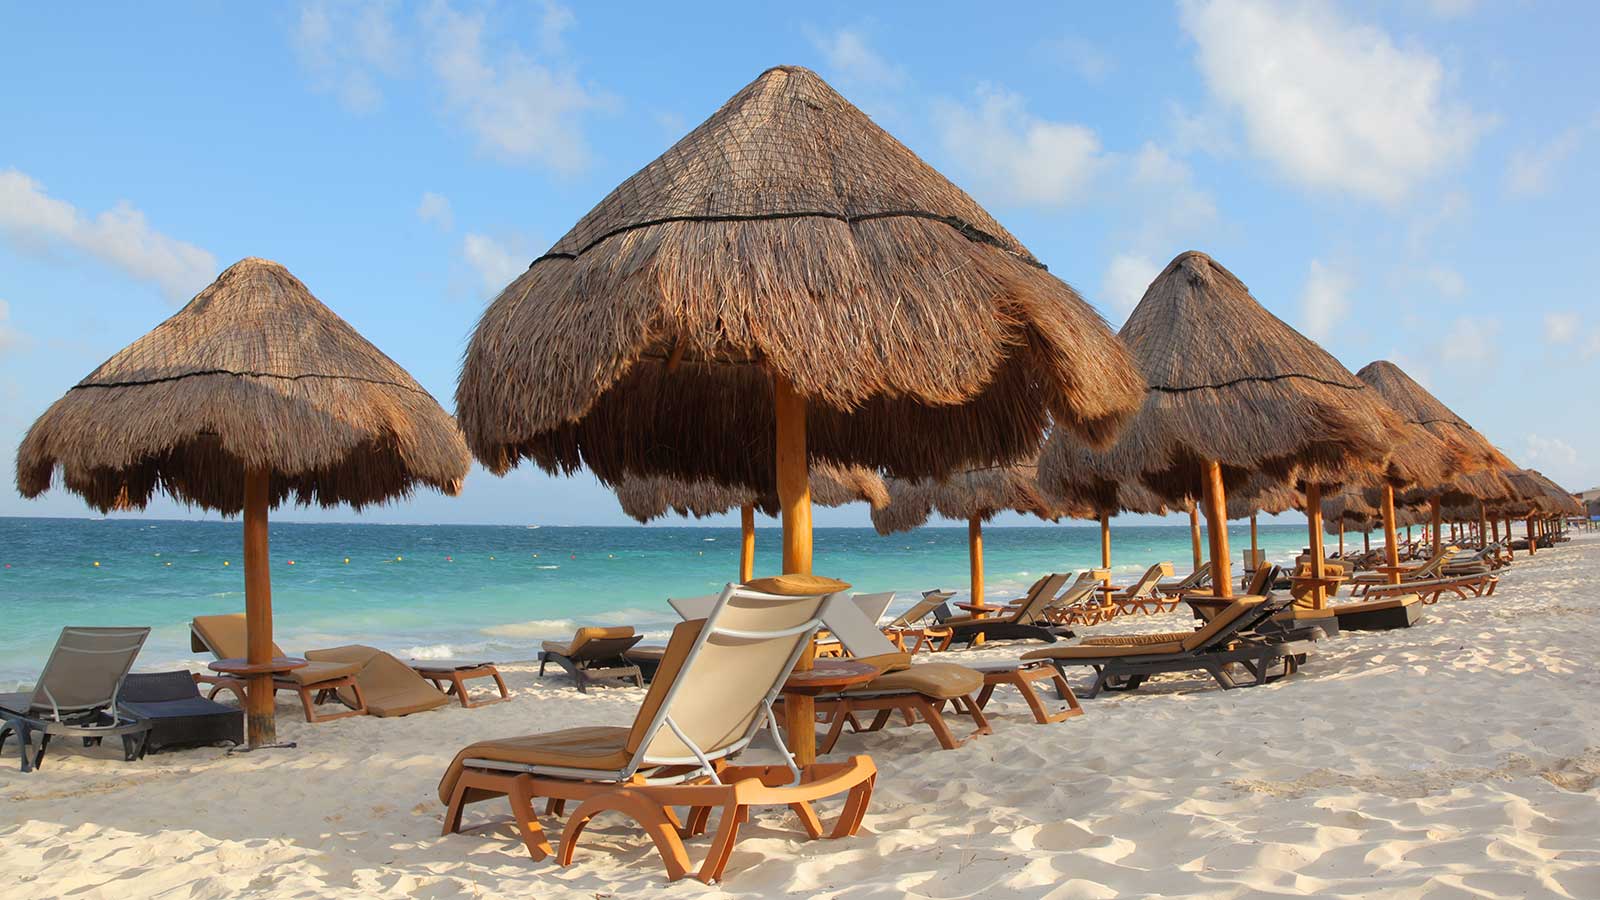 Flights from Charlottetown to Cancun